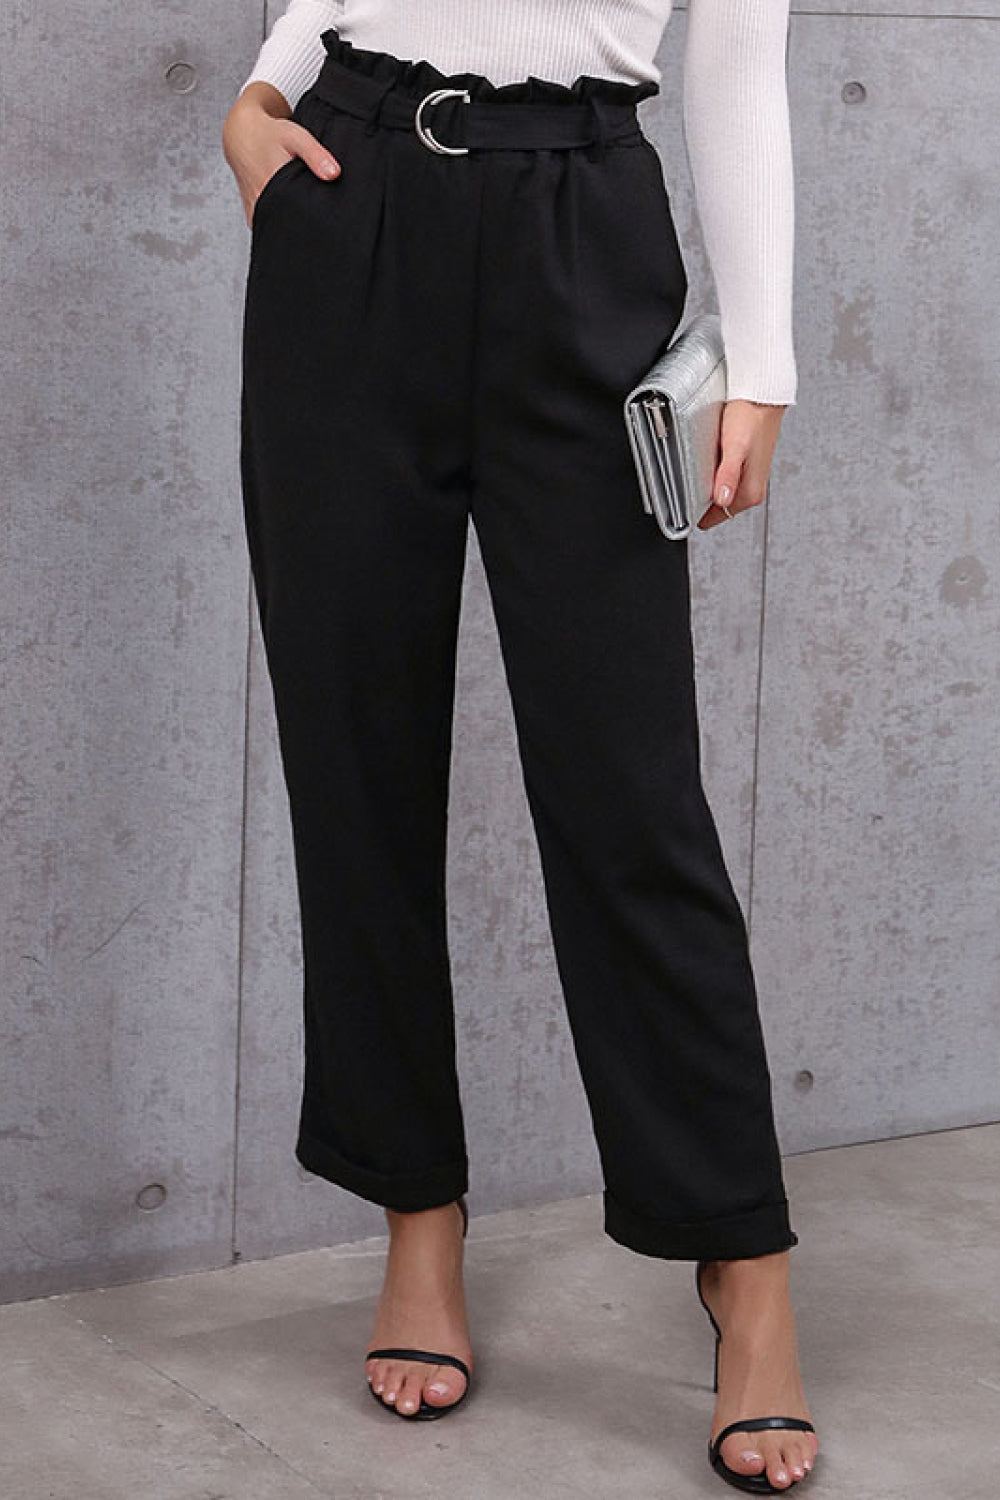 Belted Paperbag Waist Pants - Pants - FITGGINS